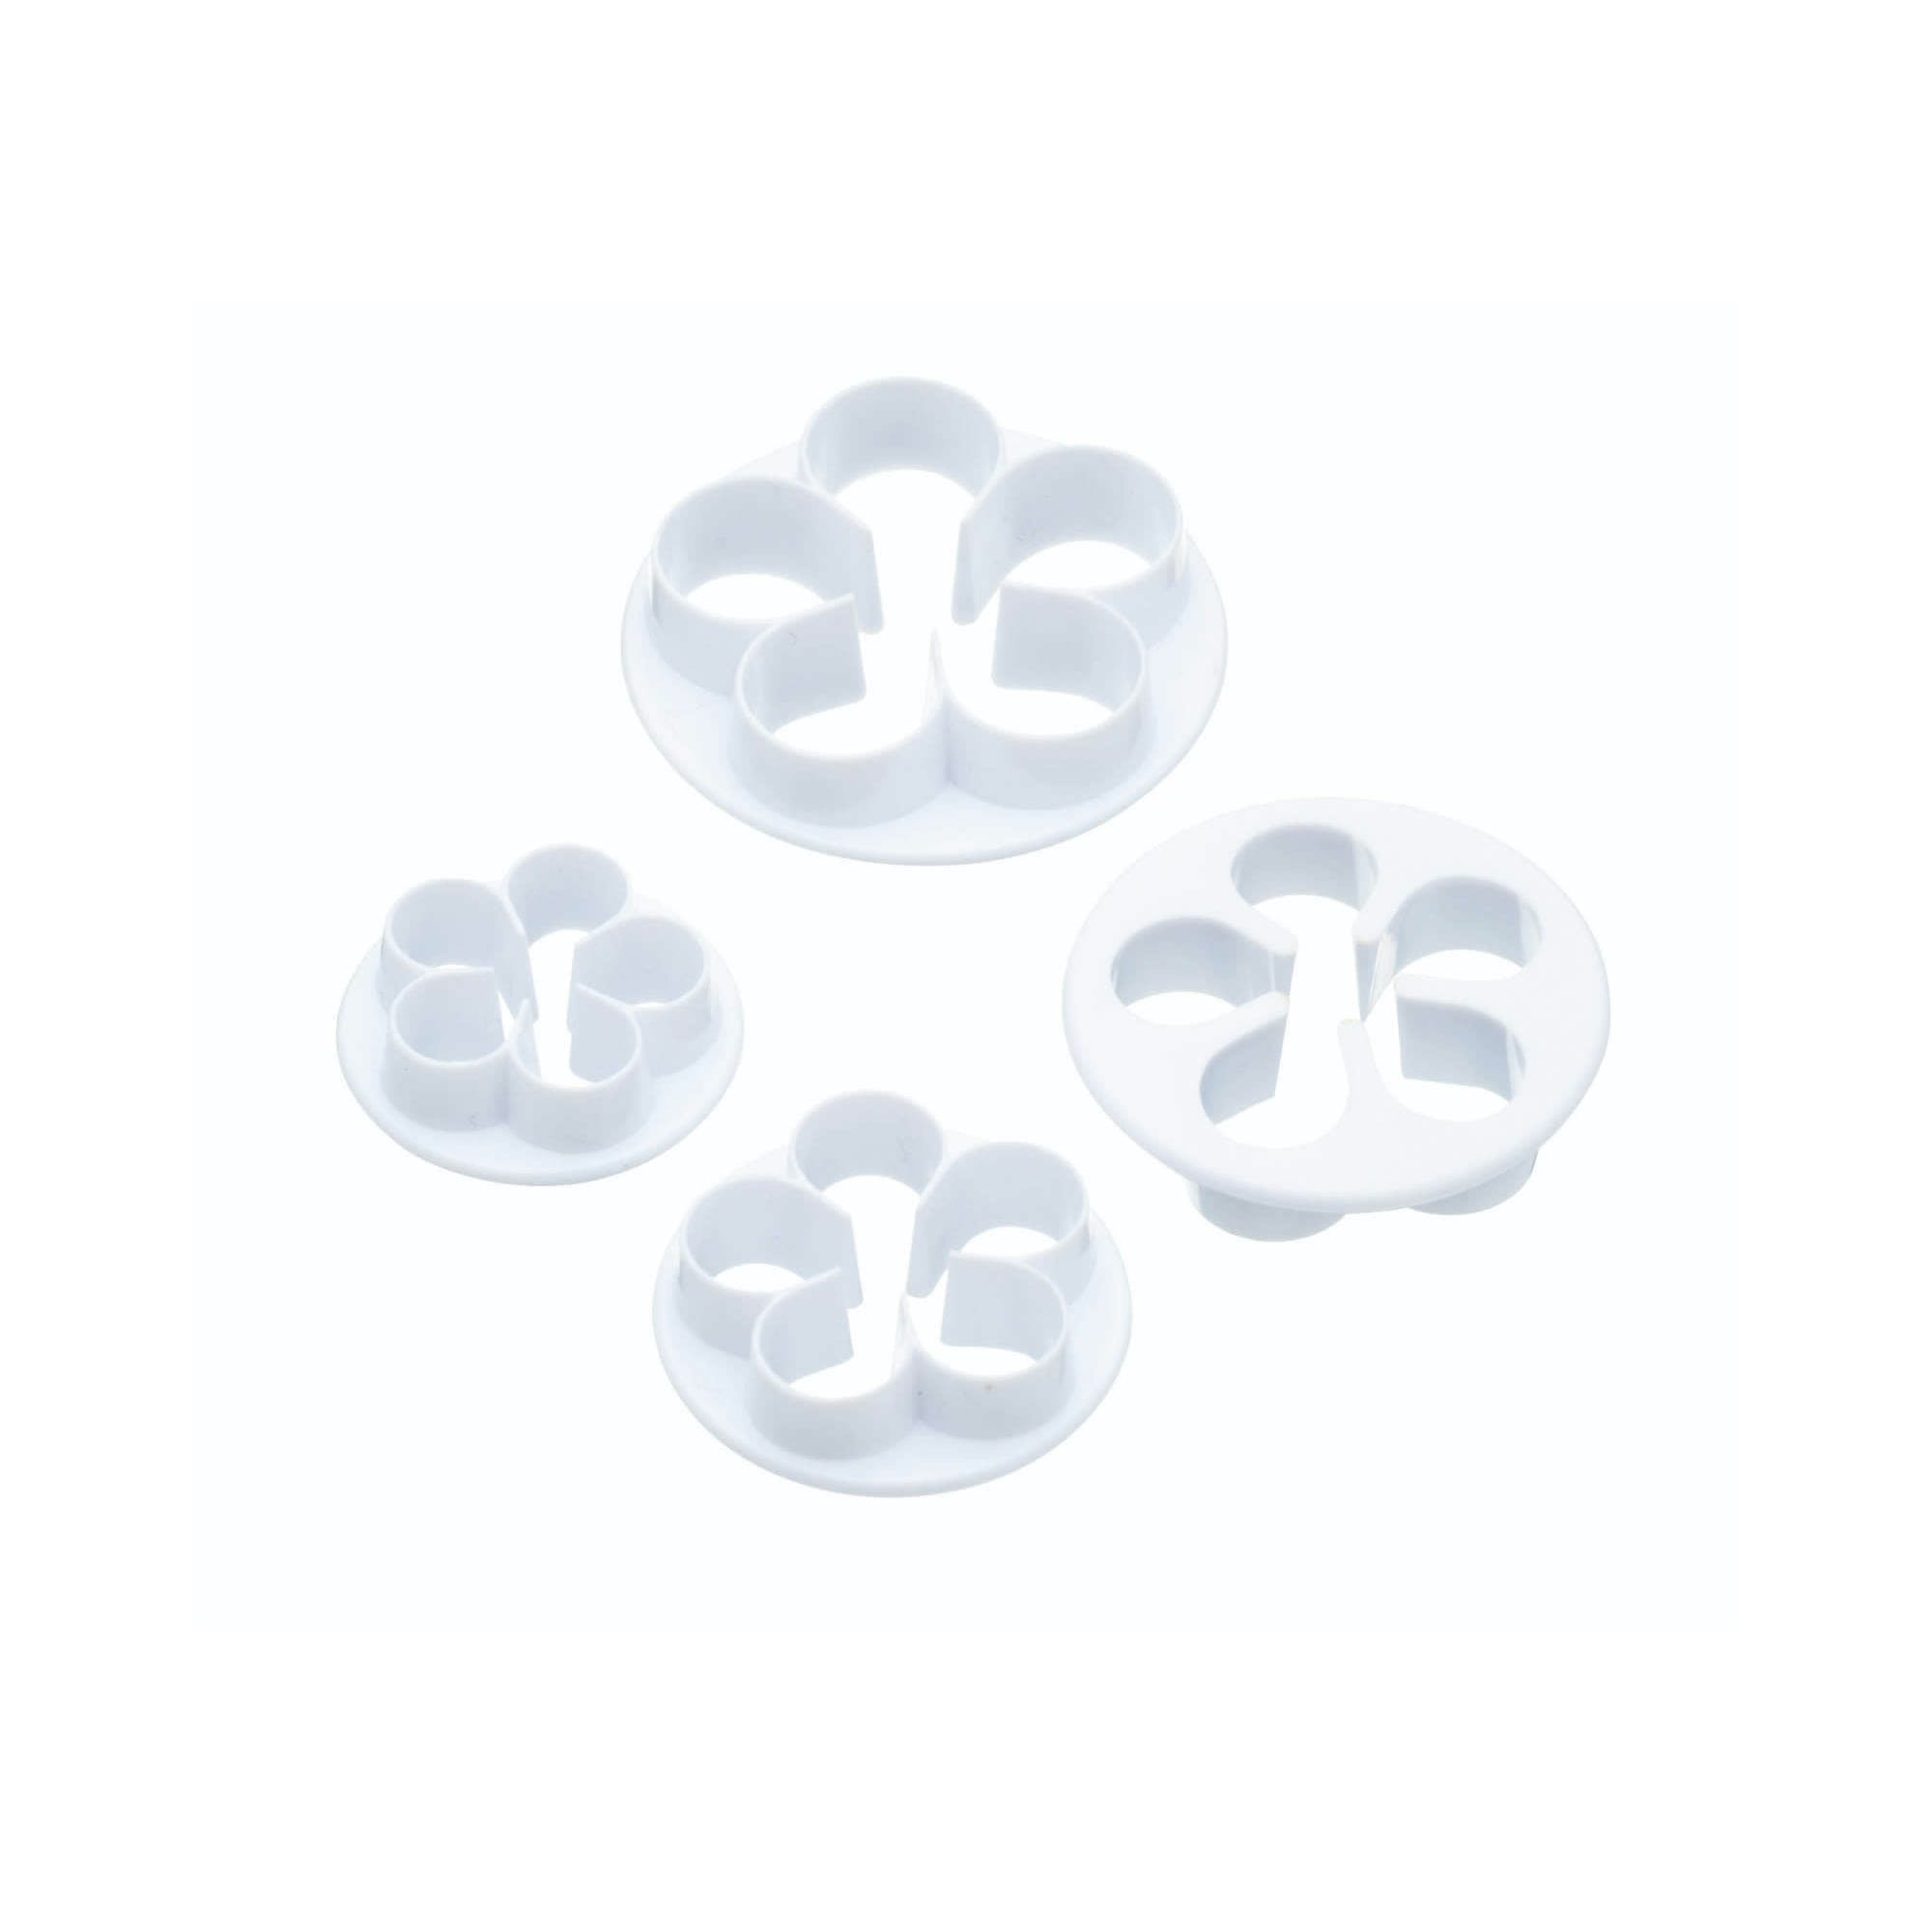 Sweetly Does It Set of 4 Rose Fondant Cutters - The Cooks Cupboard Ltd